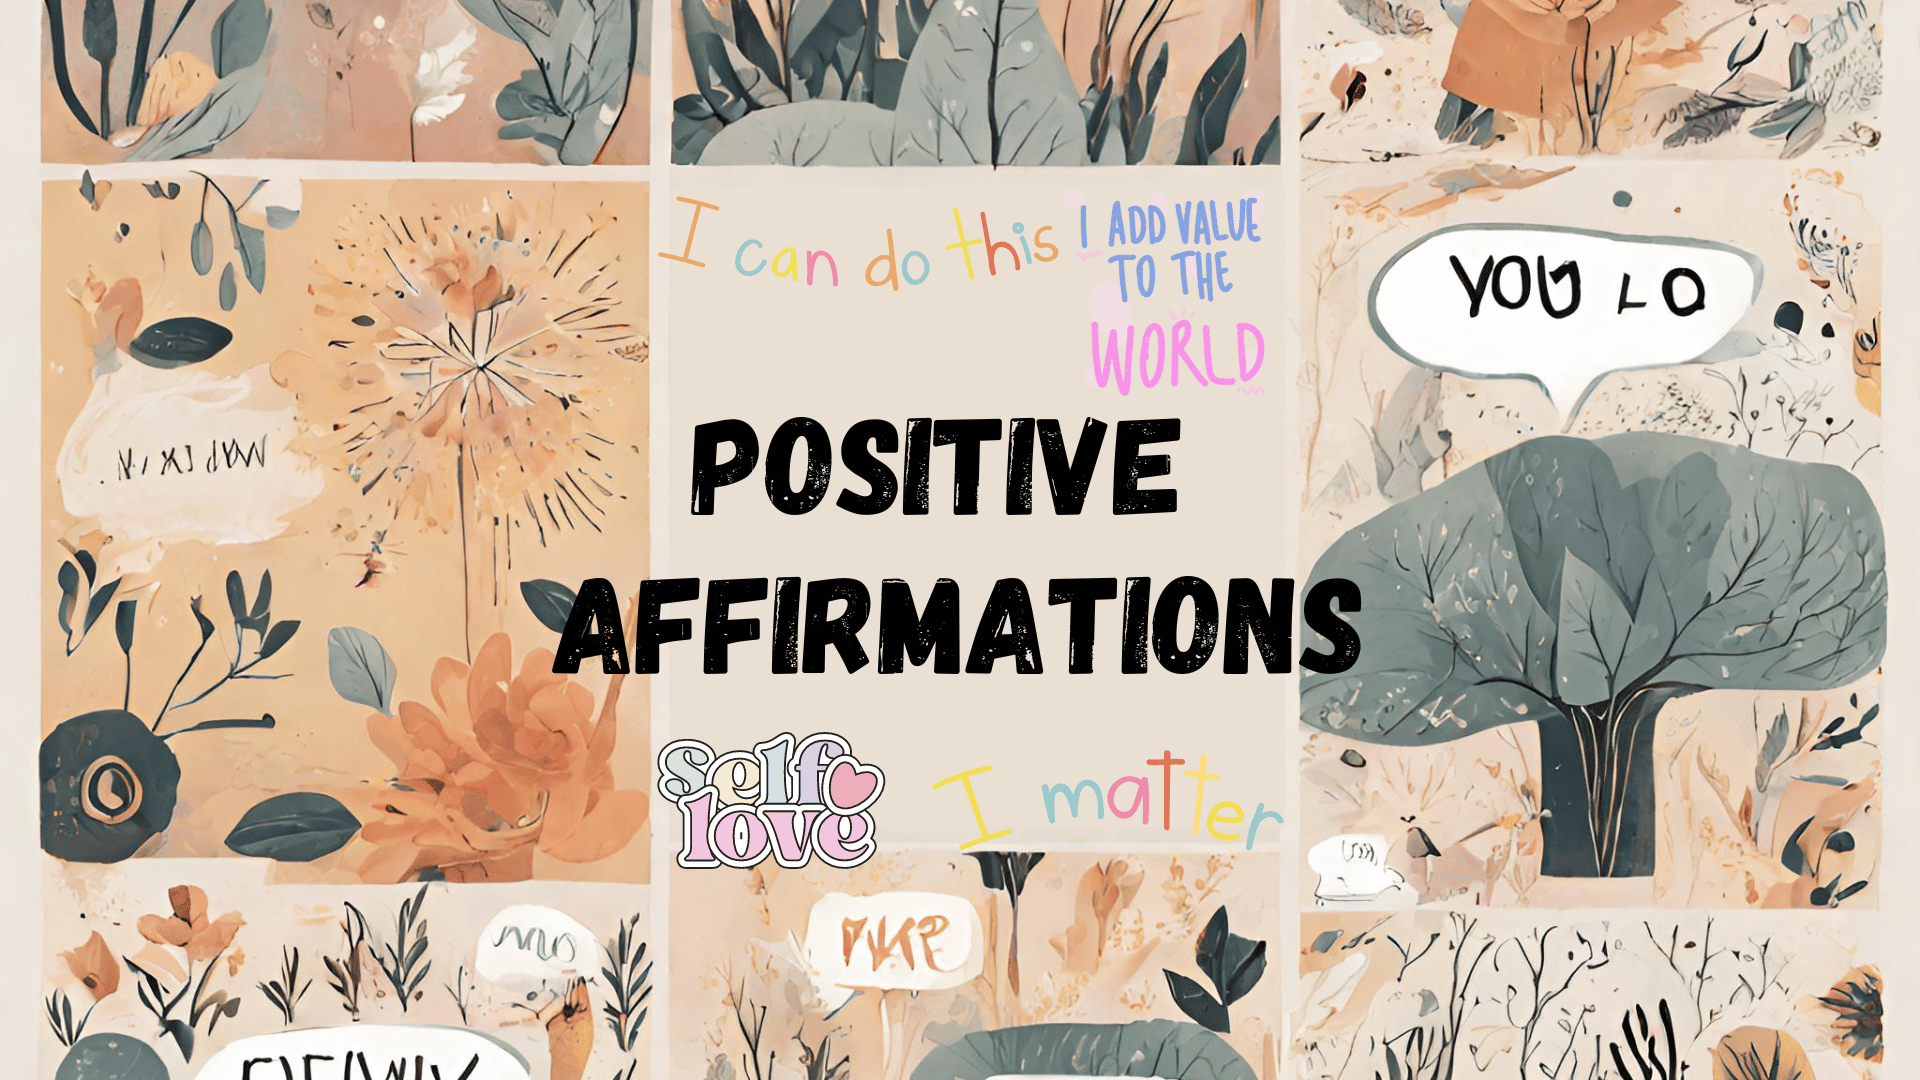 Daily Positive Affirmations